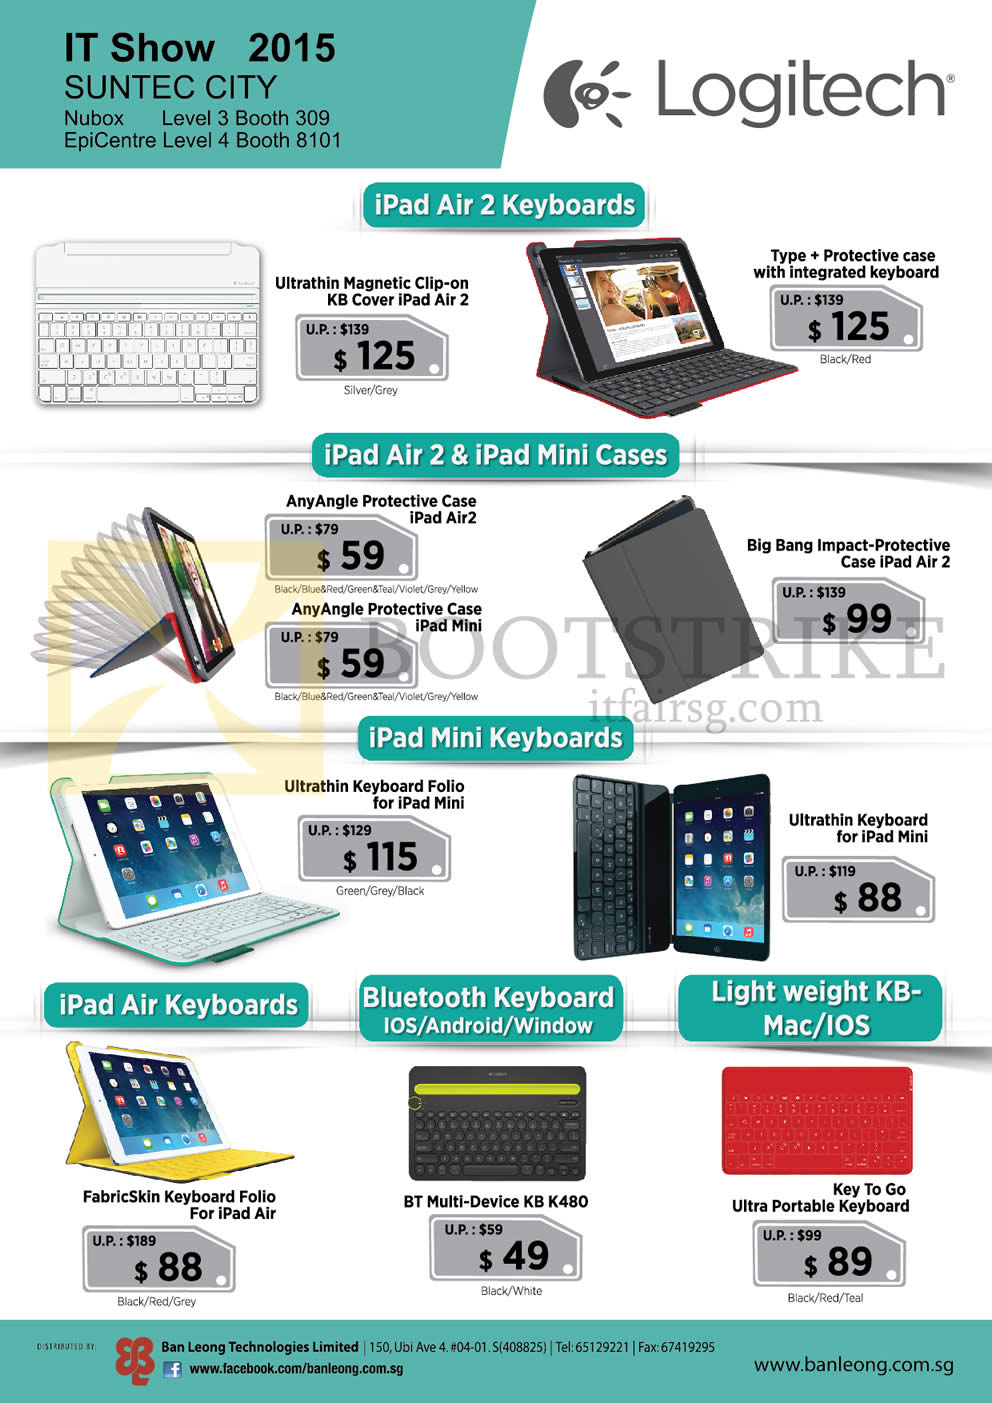 IT SHOW 2015 price list image brochure of Ban Leong Logitech Keyboards, Mini Cases, Bluetooth Keyboard, Keyboard For IPad Air 2, IPad Mini, IPad Air